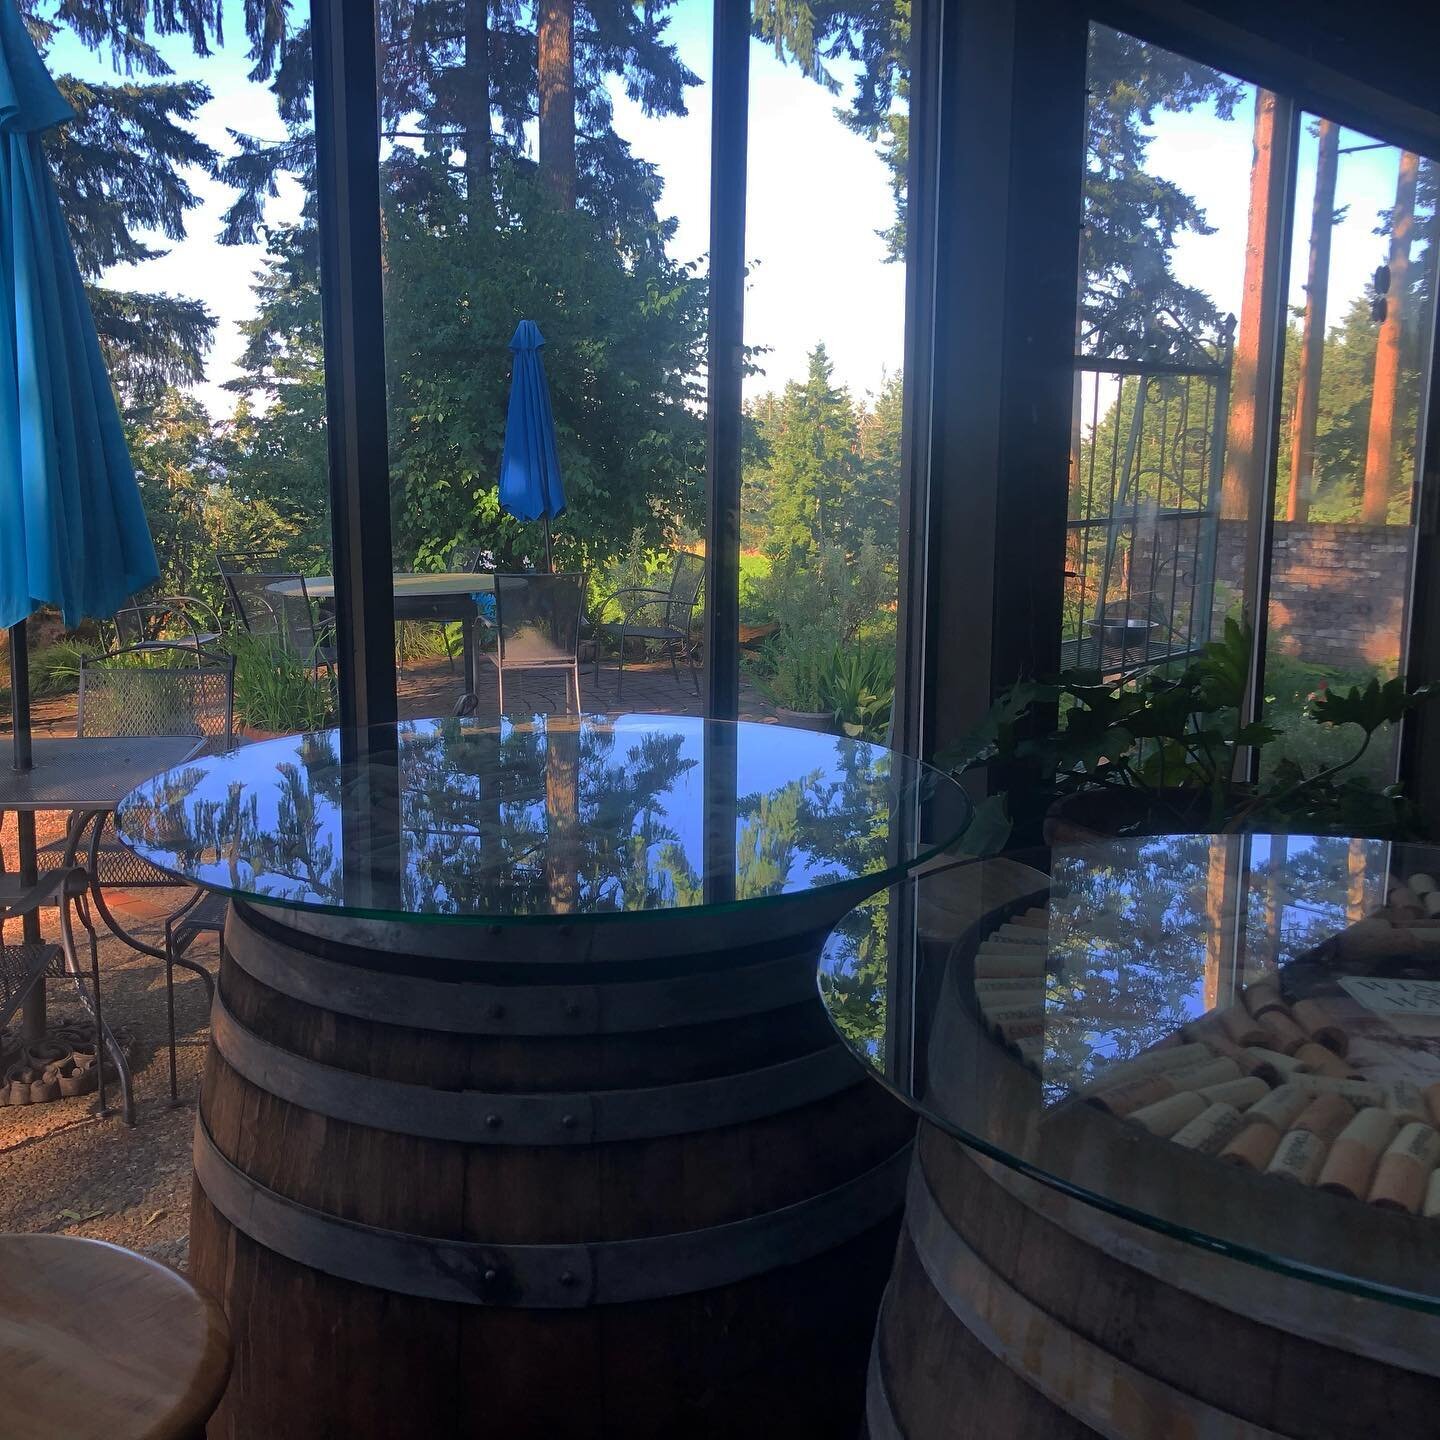 It may be hot outside, but it&rsquo;s nice and cool in the tasting room where we can sample some wonderful wines and escape the heat for a little while. We have some indoor tasting times available today, book your spot!